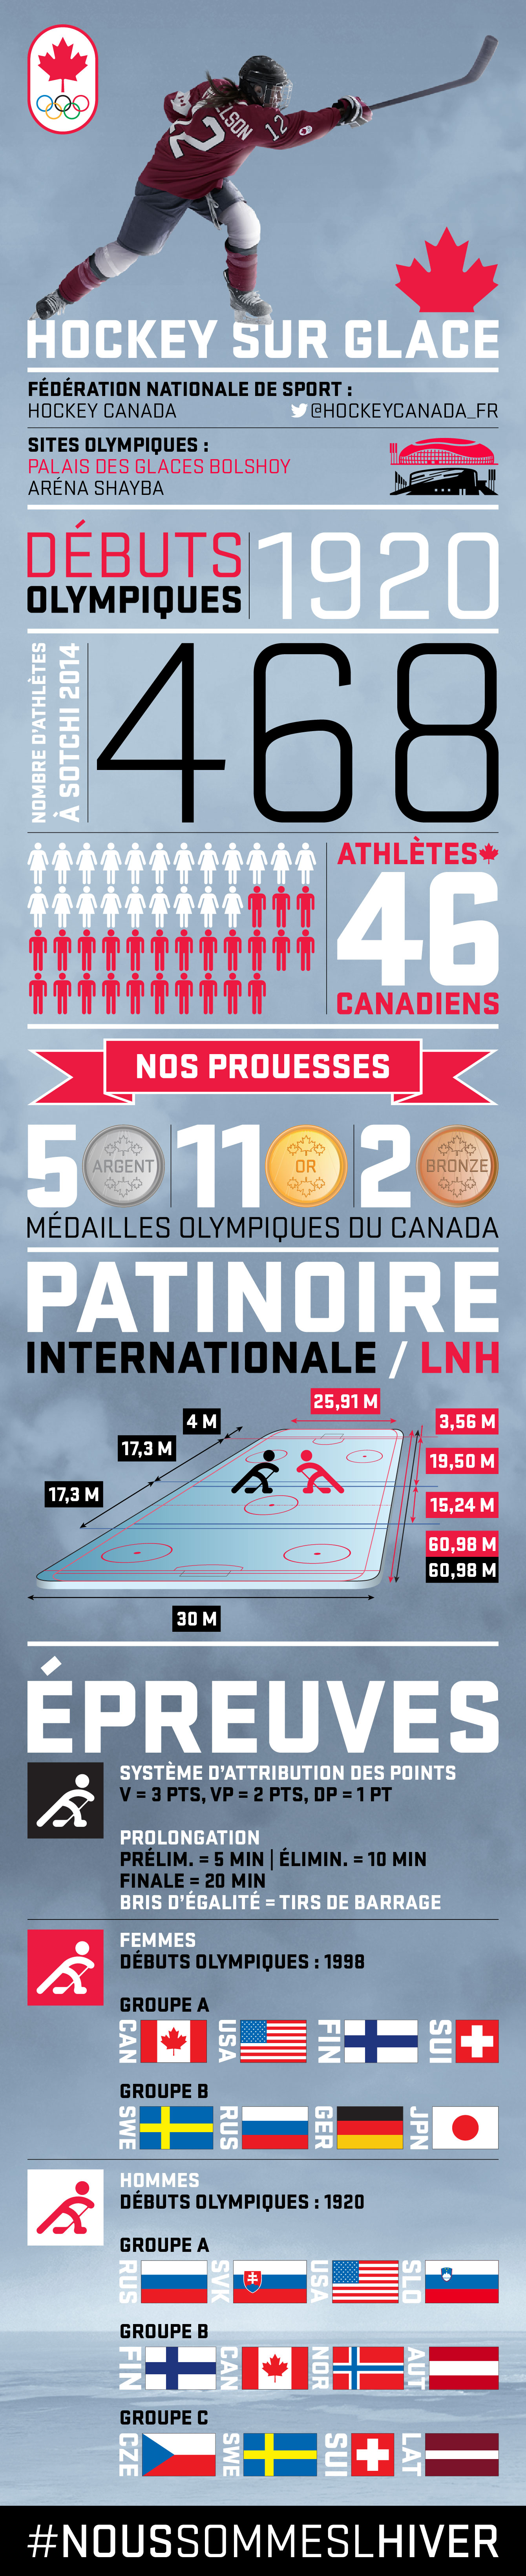 infographie_Hockey_sur_glace_FR